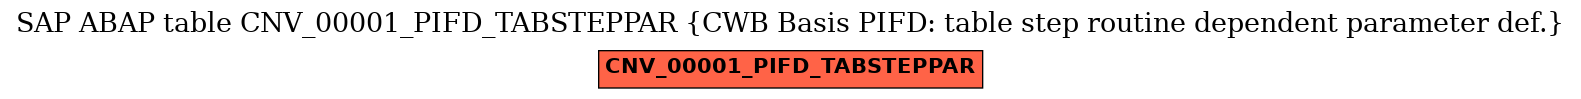 E-R Diagram for table CNV_00001_PIFD_TABSTEPPAR (CWB Basis PIFD: table step routine dependent parameter def.)